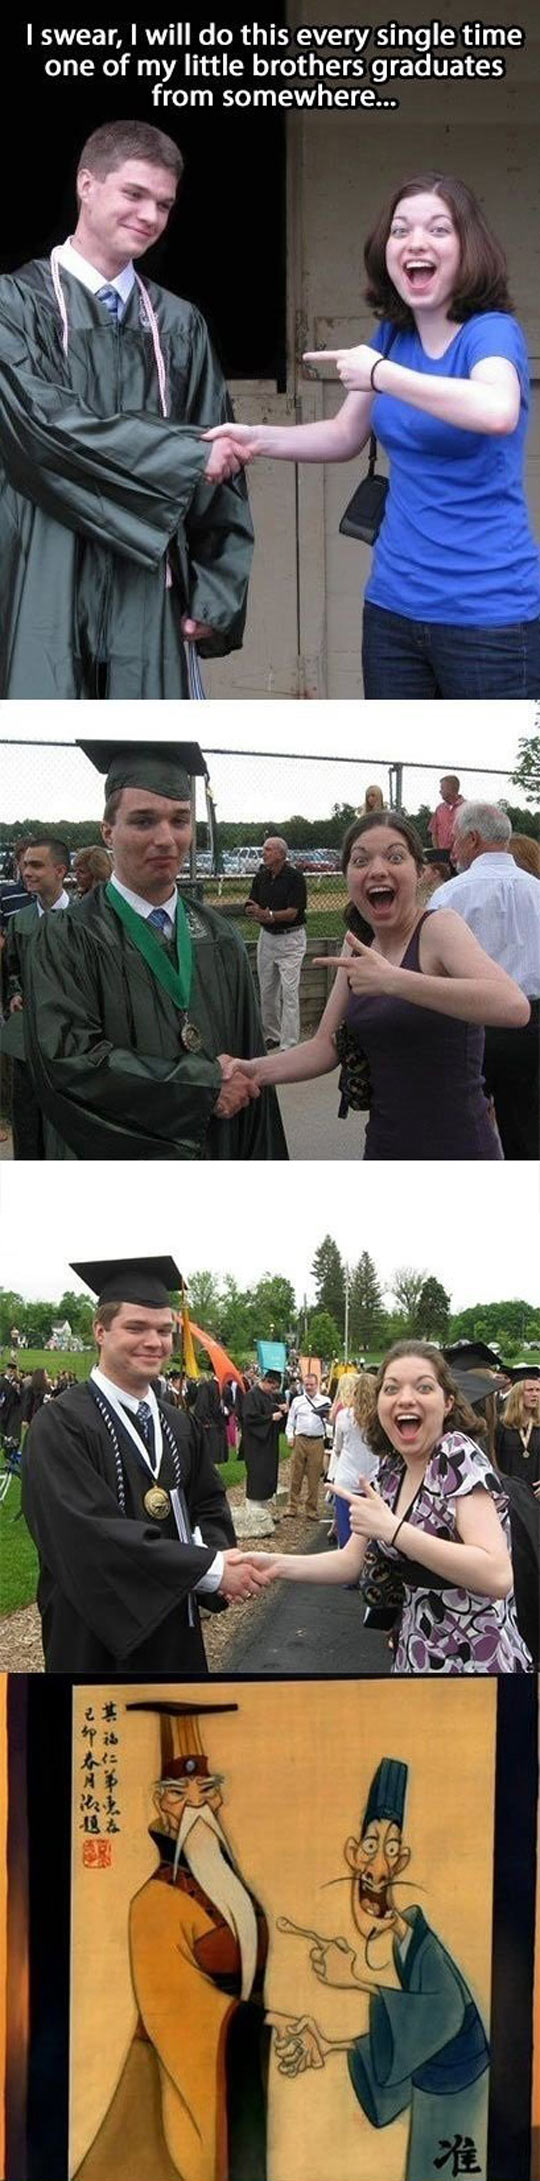 cool-brothers-graduation-pointing-shaking-hand